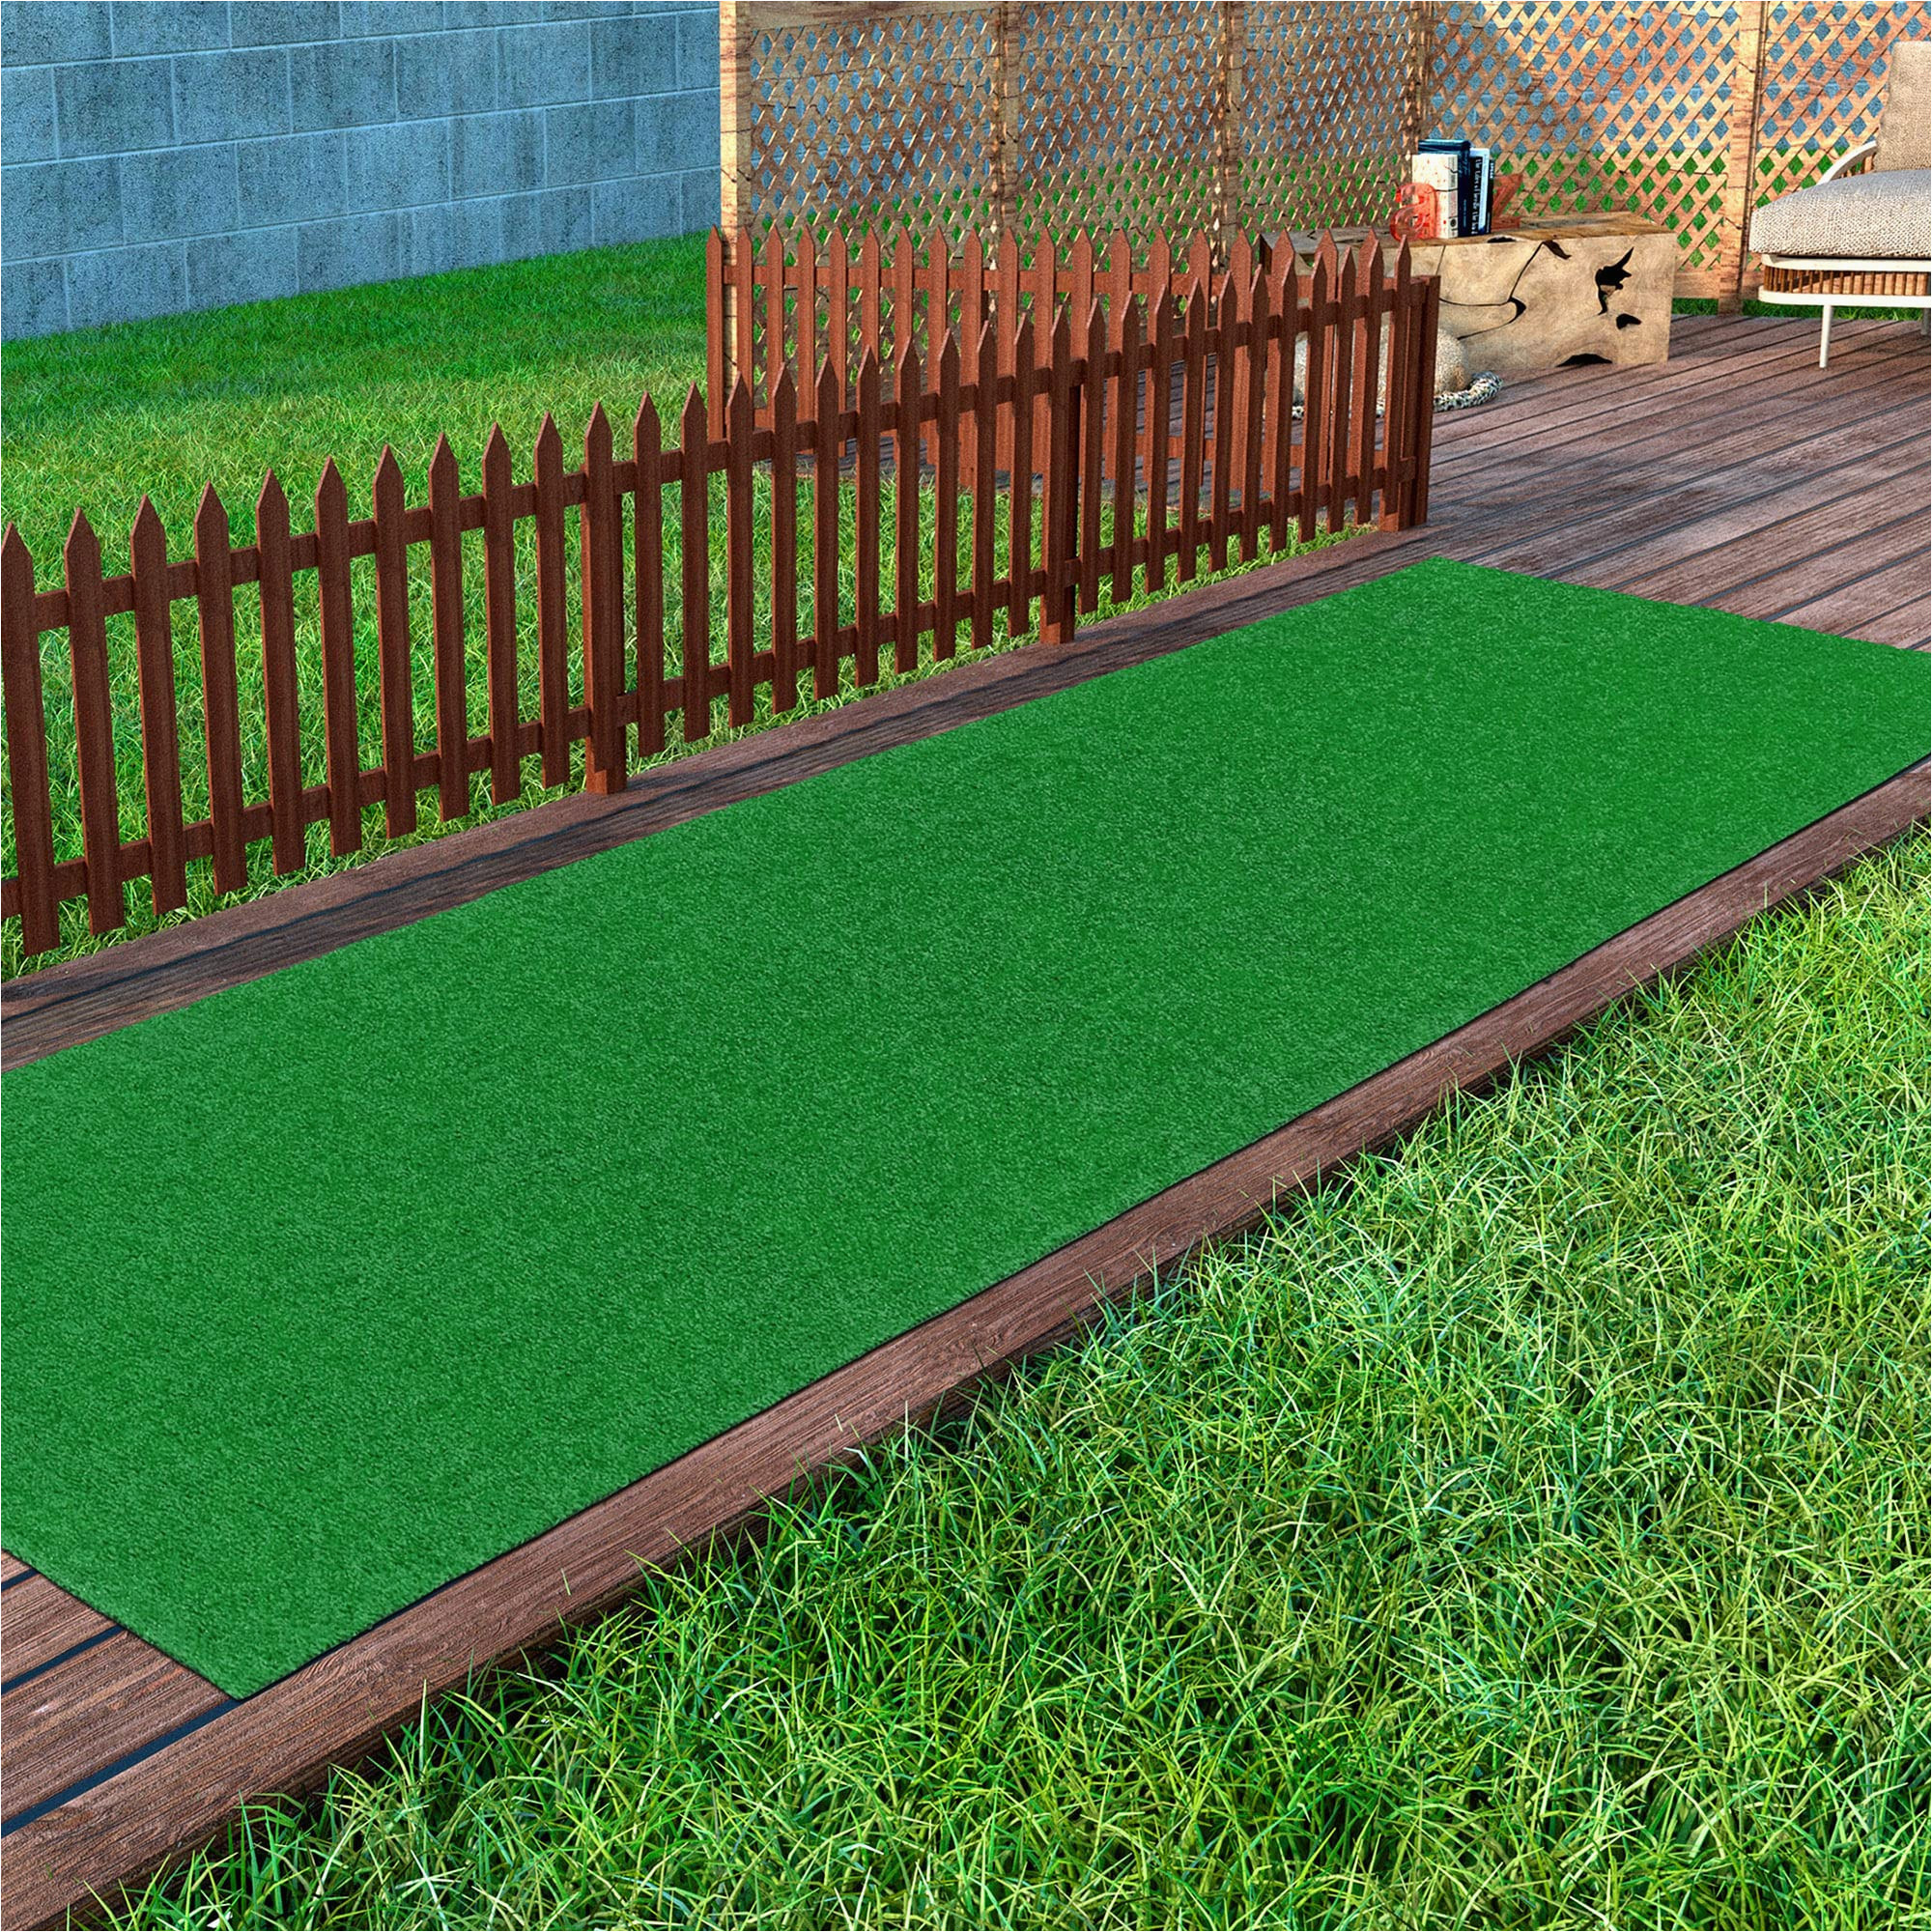 Sweet Home Meadowland Artificial Grass Indoor Outdoor area Rug Sweethome Meadowland Collection Indoor and Outdoor Green Artificial Grass Turf Runner Rug 2’7″ X 9’10” Green Artificial Grass/pet Mat with Rubber …